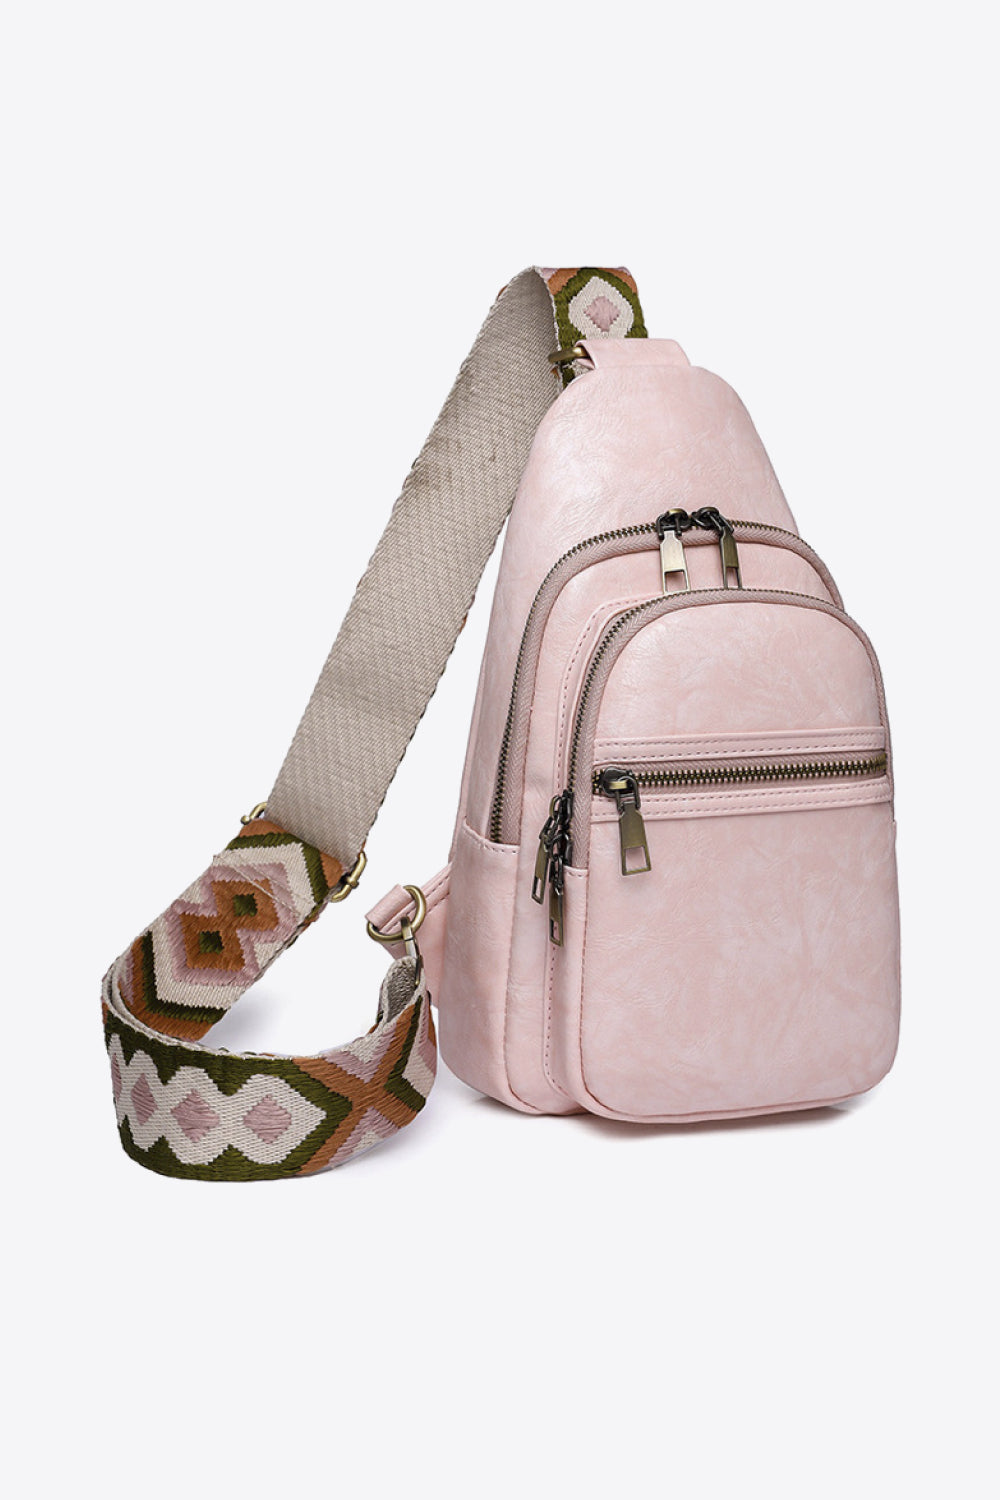 Lavender It's Your Time PU Leather Sling Bag Handbags